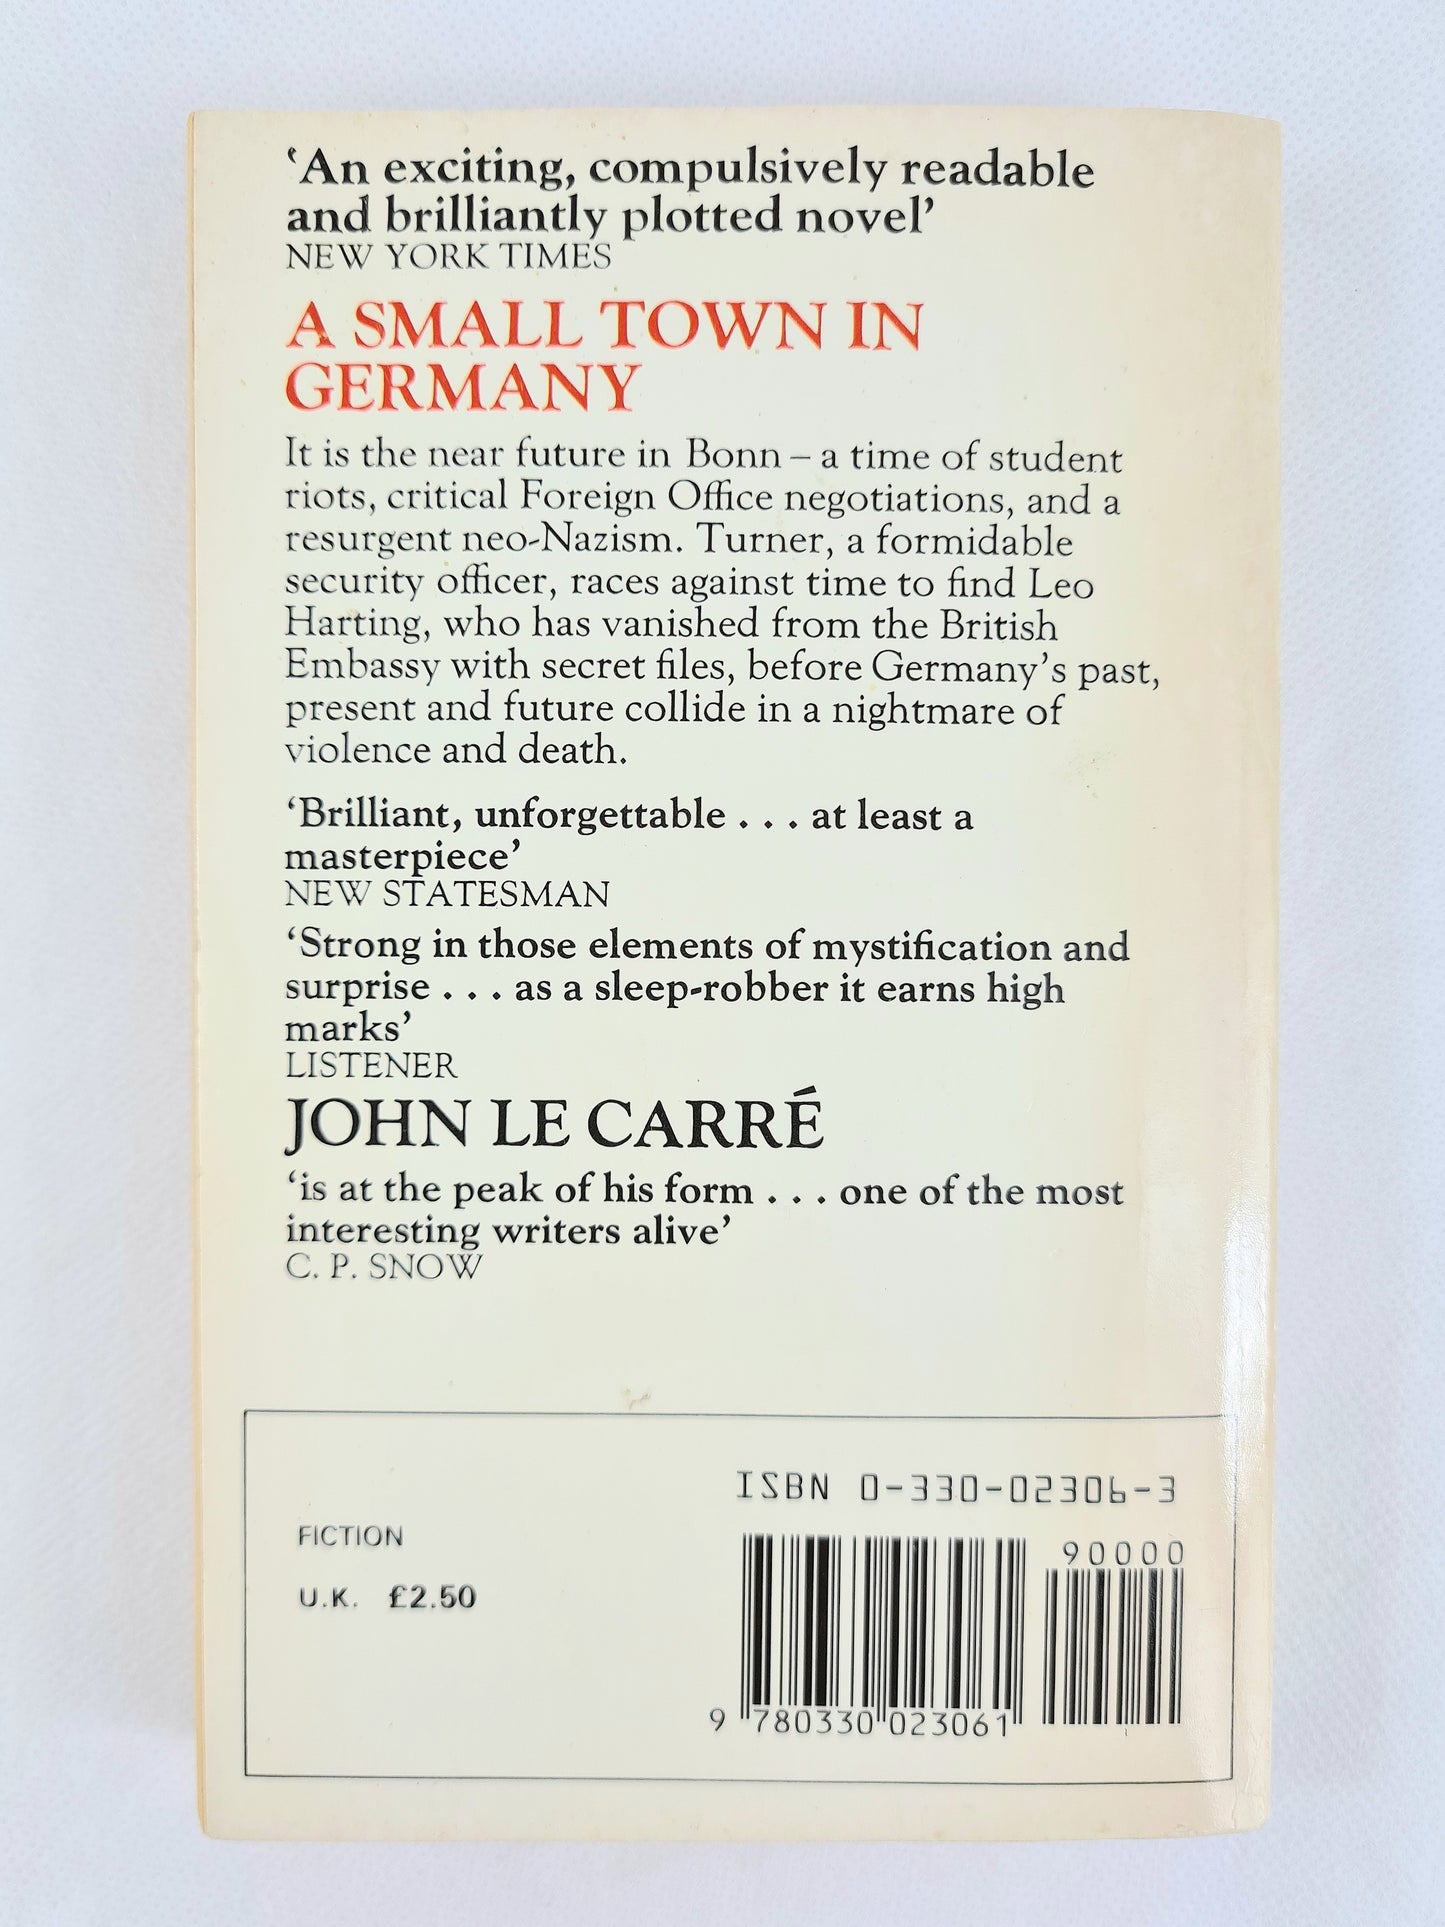 A Small Town In Germany by John Le Carre. Vintage Paperbacks